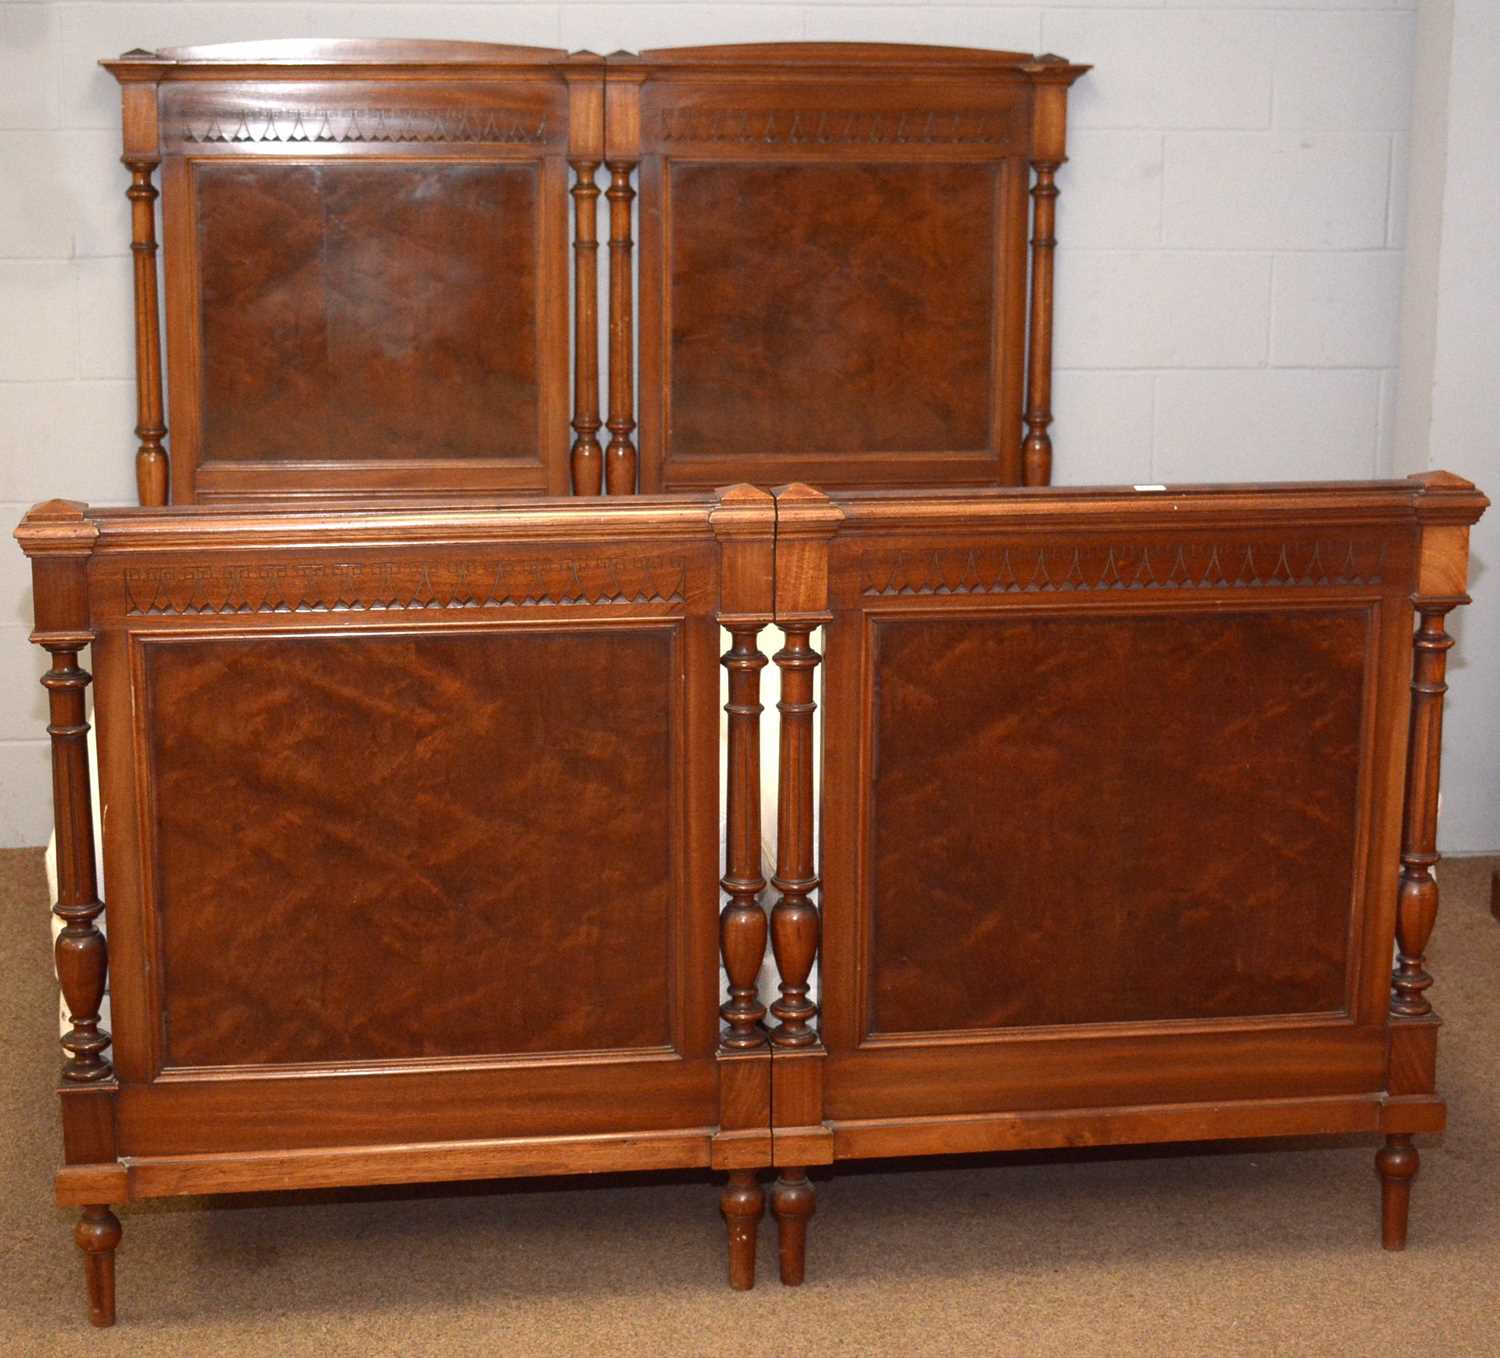 Lot 61 - A French style mahogany kingsize double bed (dividable into two single beds)